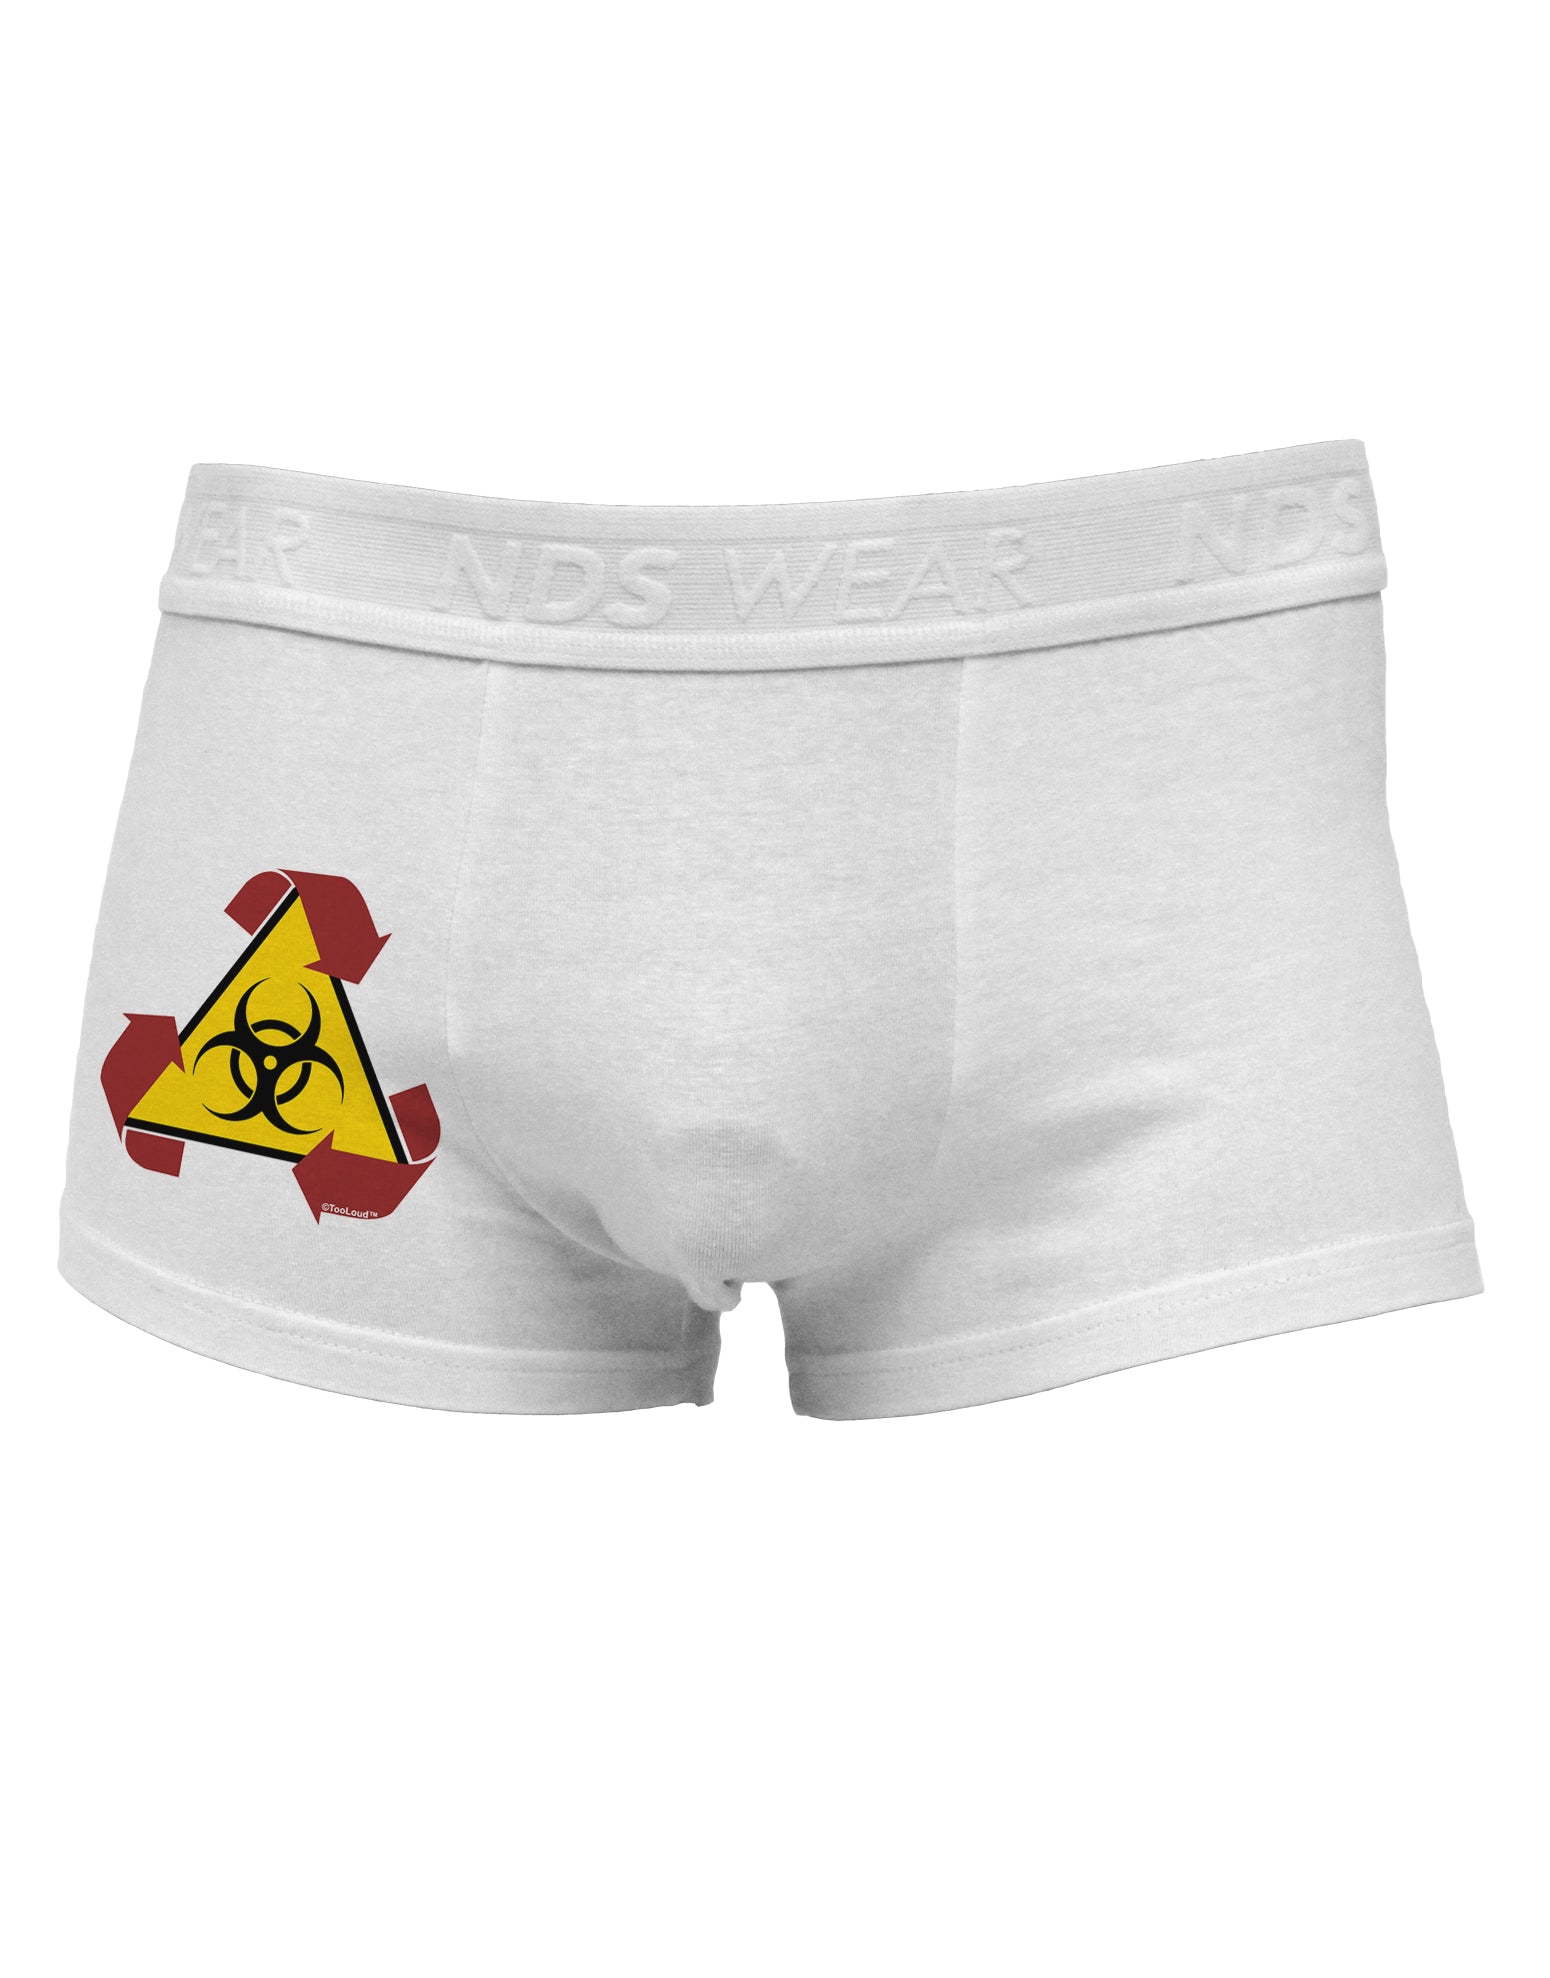 Recycle Biohazard Sign Side Printed Mens Trunk Underwear by TooLoud